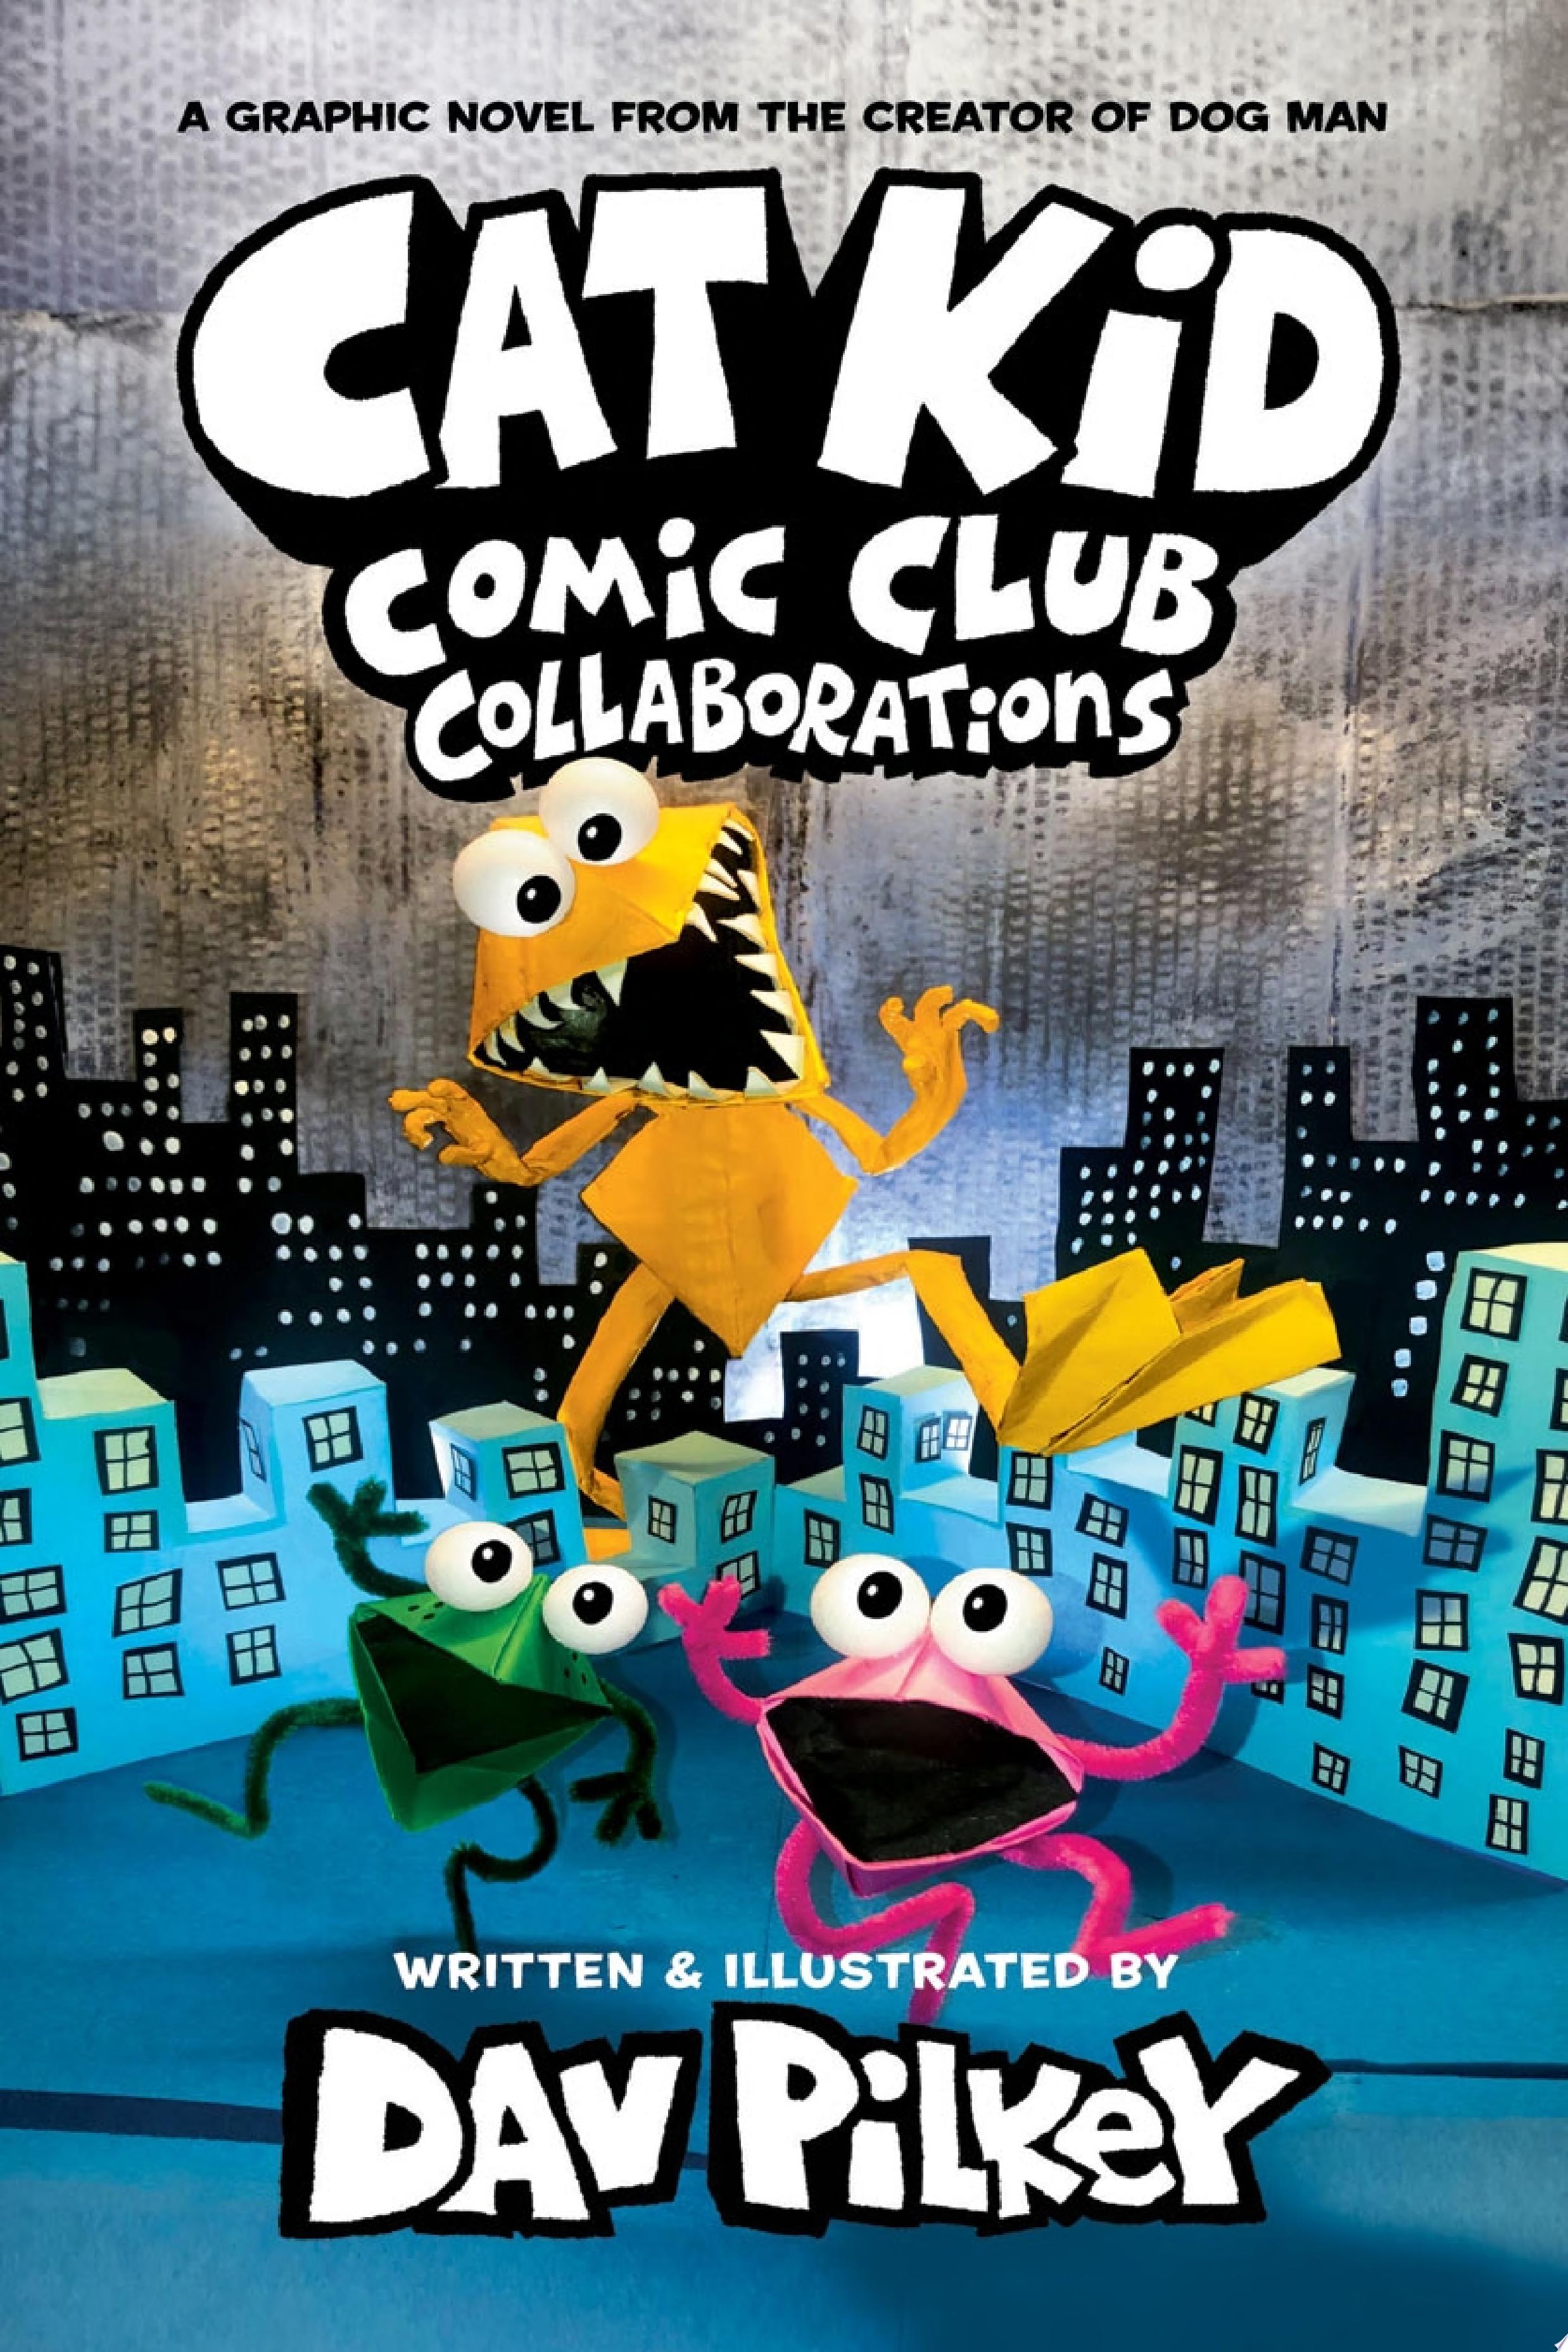 Image for "Cat Kid Comic Club: Collaborations: A Graphic Novel (Cat Kid Comic Club #4): From the Creator of Dog Man"